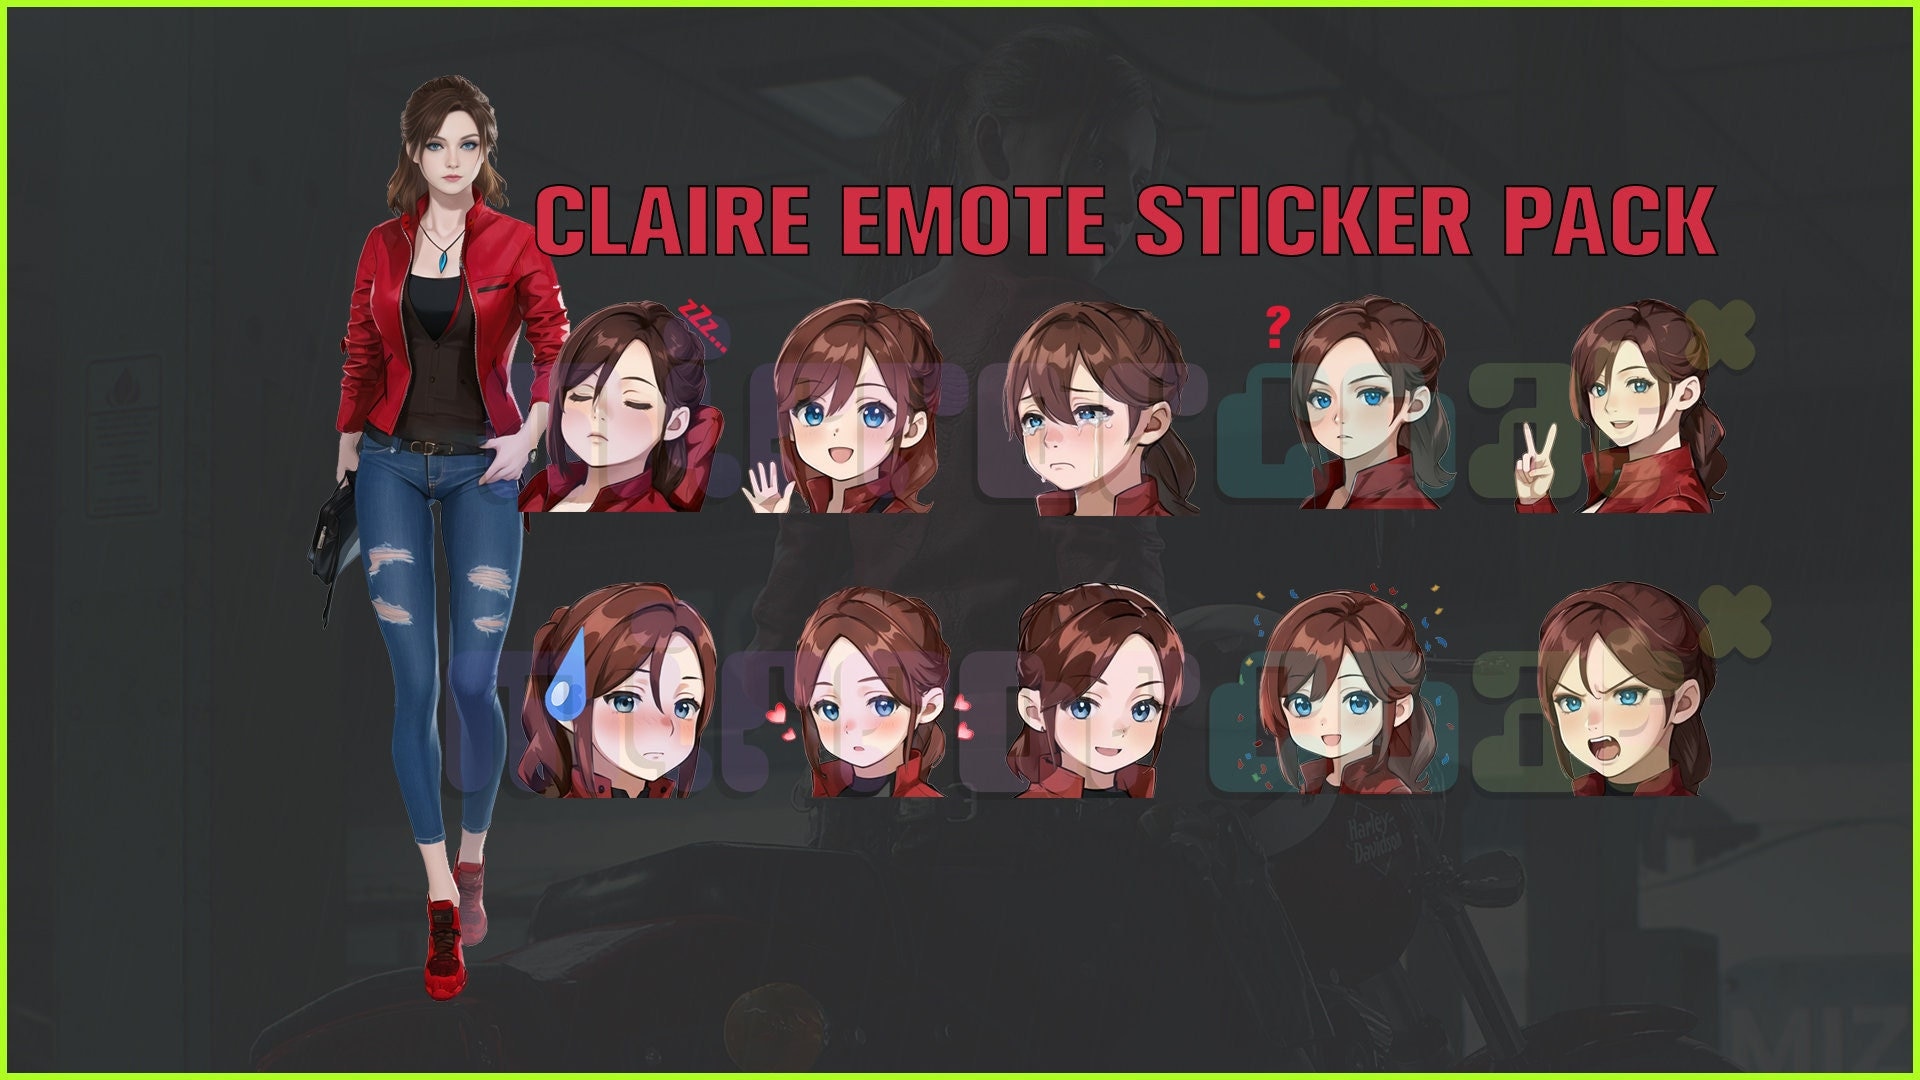 60+ Claire Redfield HD Wallpapers and Backgrounds